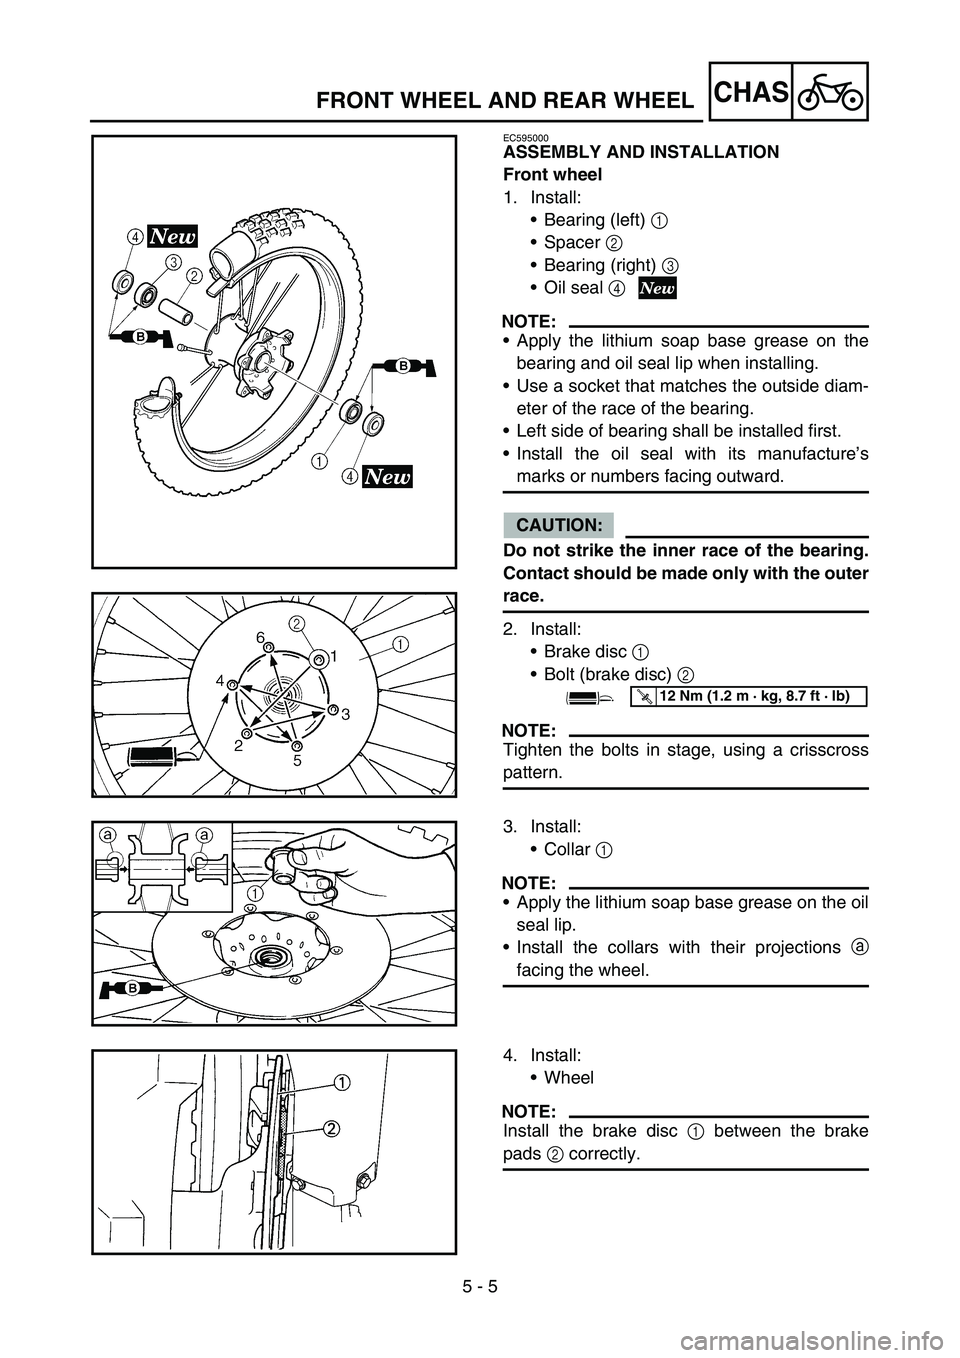 YAMAHA YZ250F 2007  Owners Manual 5 - 5
CHASFRONT WHEEL AND REAR WHEEL
EC595000
ASSEMBLY AND INSTALLATION
Front wheel
1. Install:
Bearing (left) 1 
Spacer 2 
Bearing (right) 3 
Oil seal 4
NOTE:
Apply the lithium soap base grease 